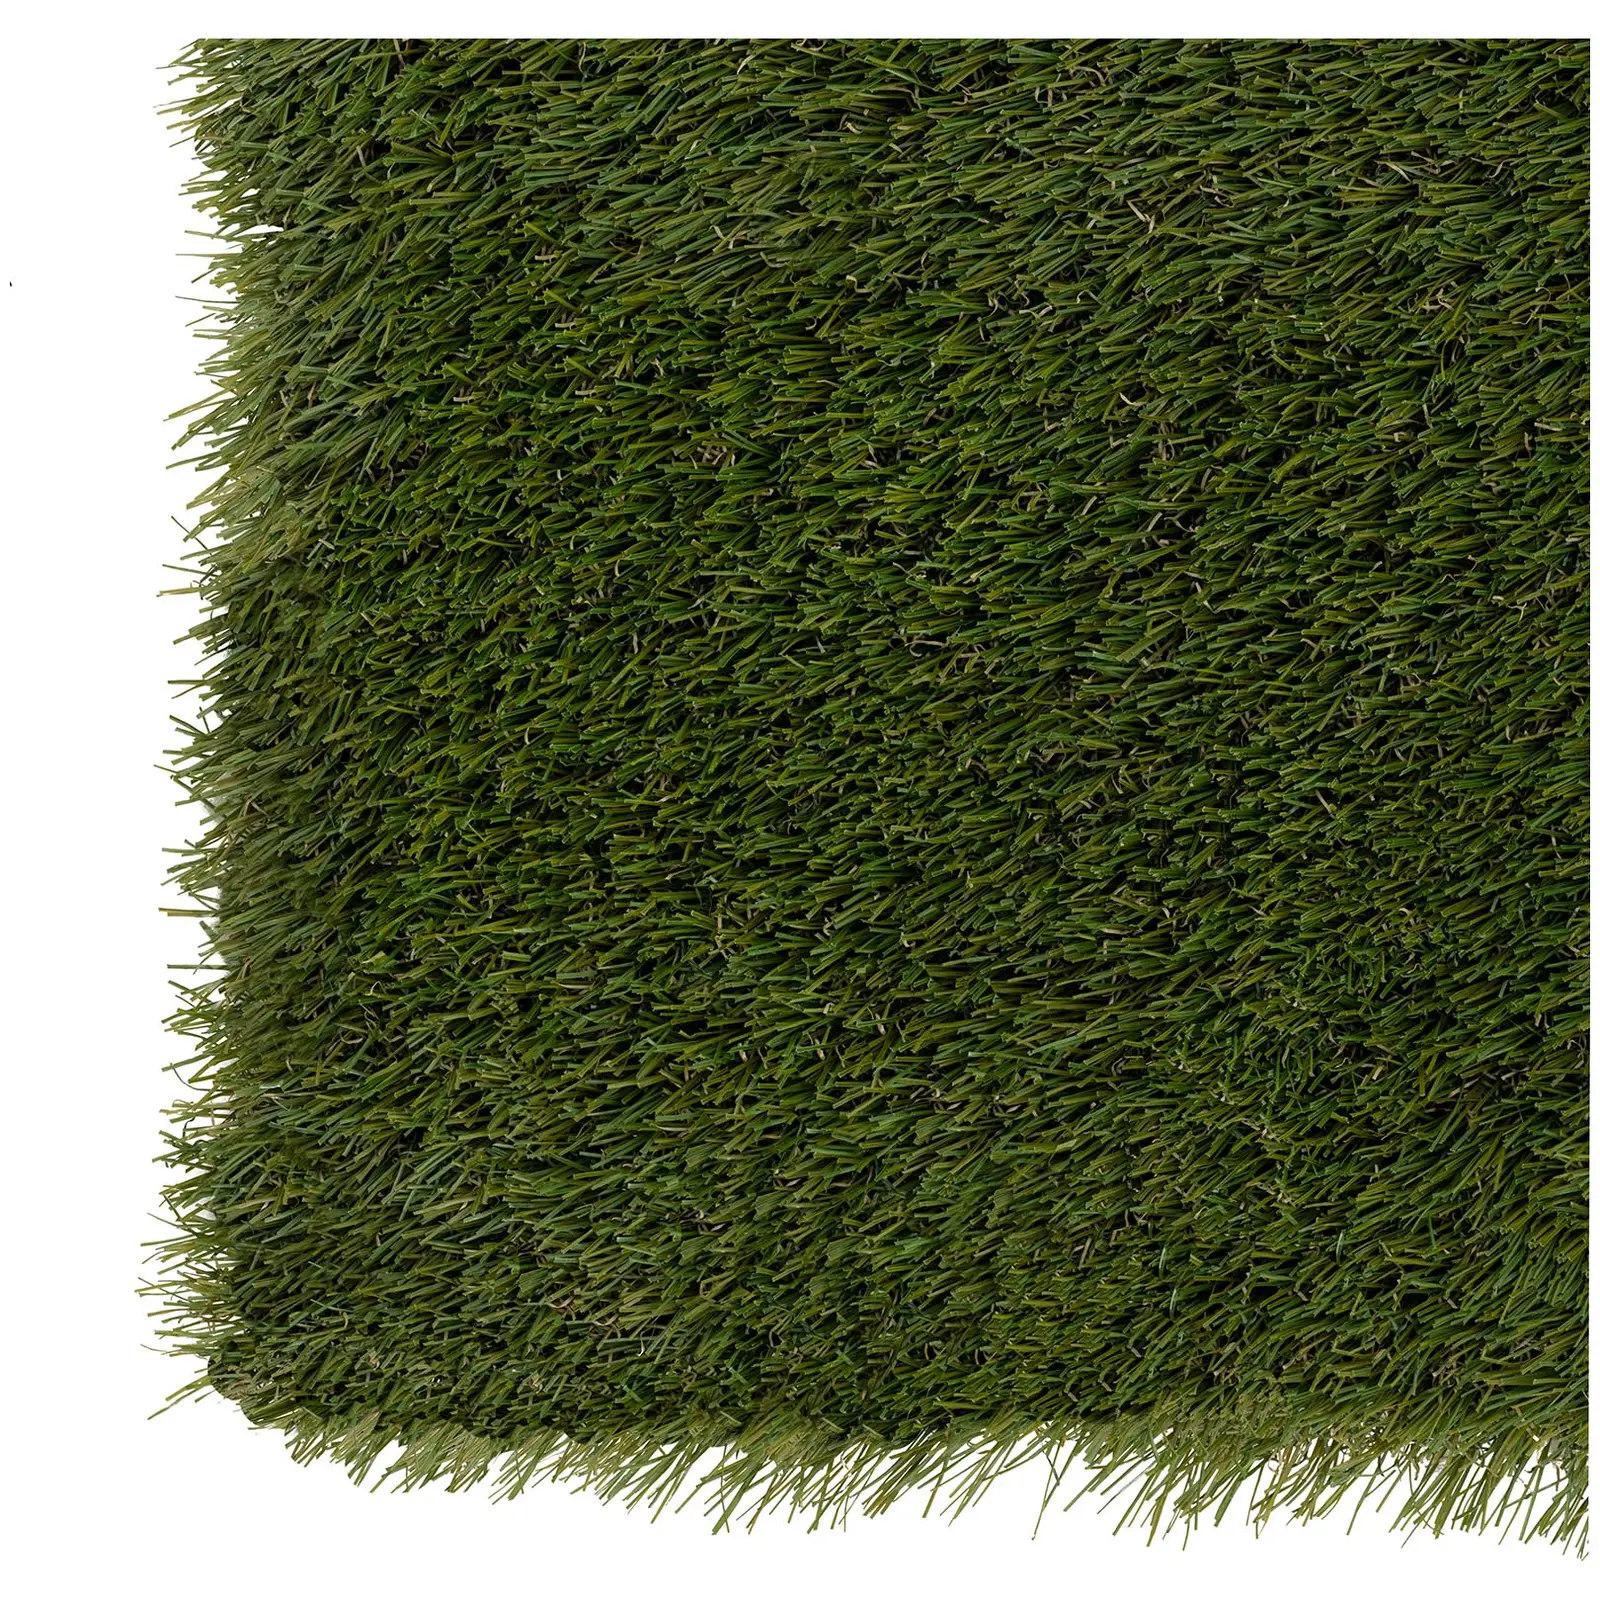 Artificial grass - 200 x 1000 cm - Height: 30 mm - Stitch rate: 20/10 cm - UV-resistant